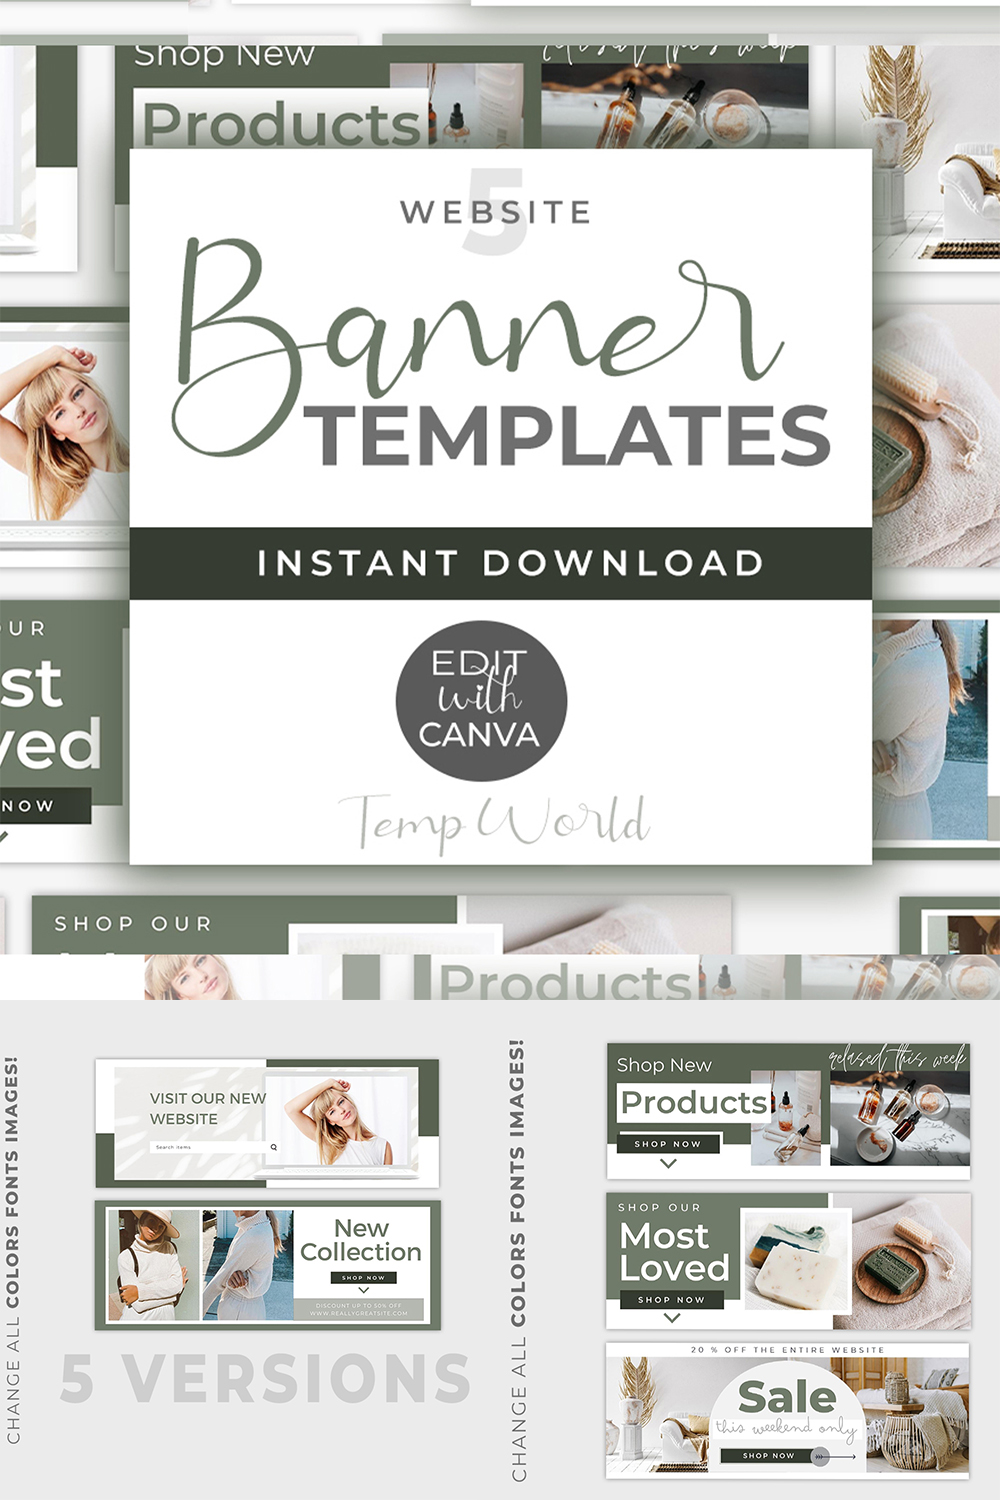 Pack Off 5 Web Banners Templates pinterest image.